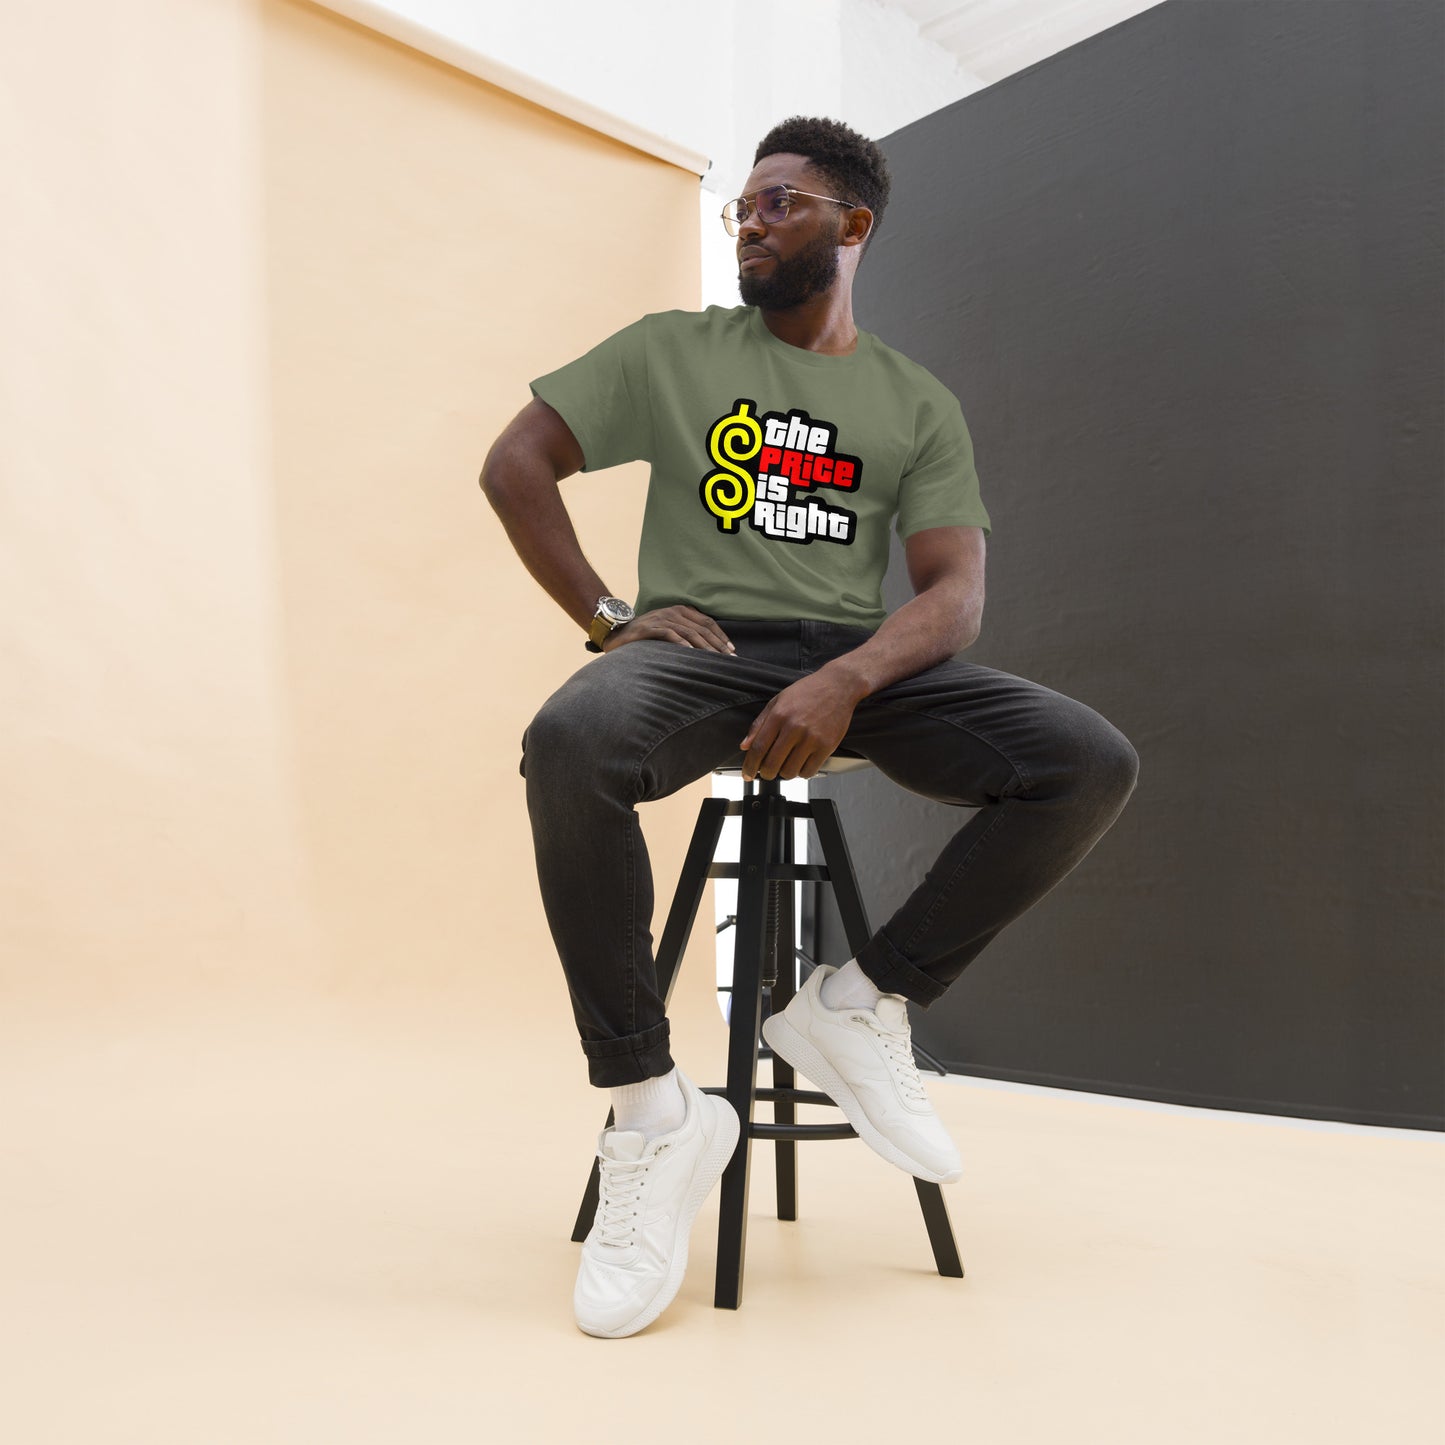 Men's classic tee -  The Price is Right